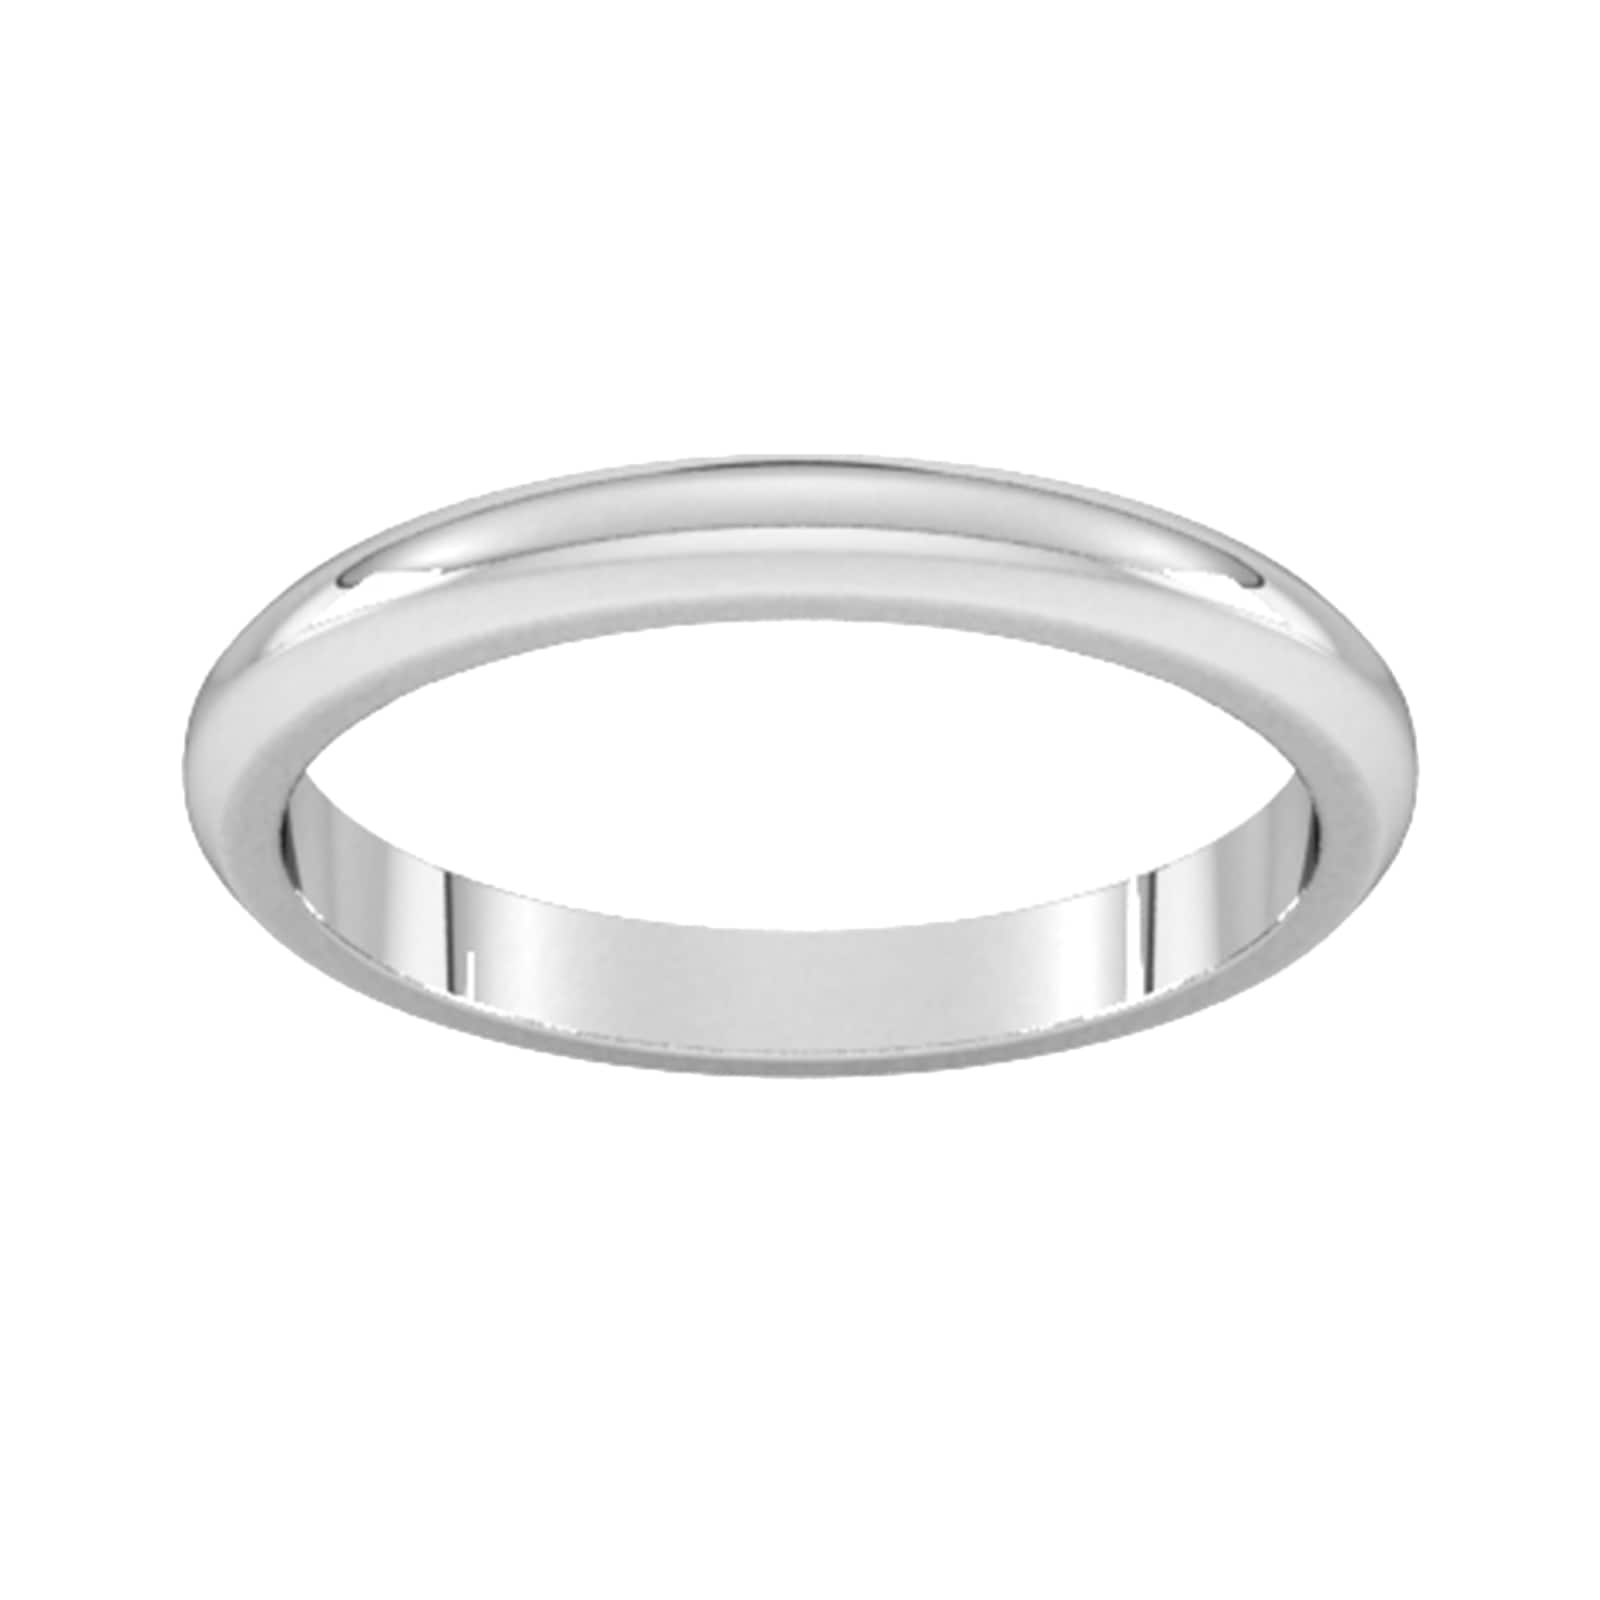 2.5mm D Shape Heavy Wedding Ring In 9 Carat White Gold - Ring Size U